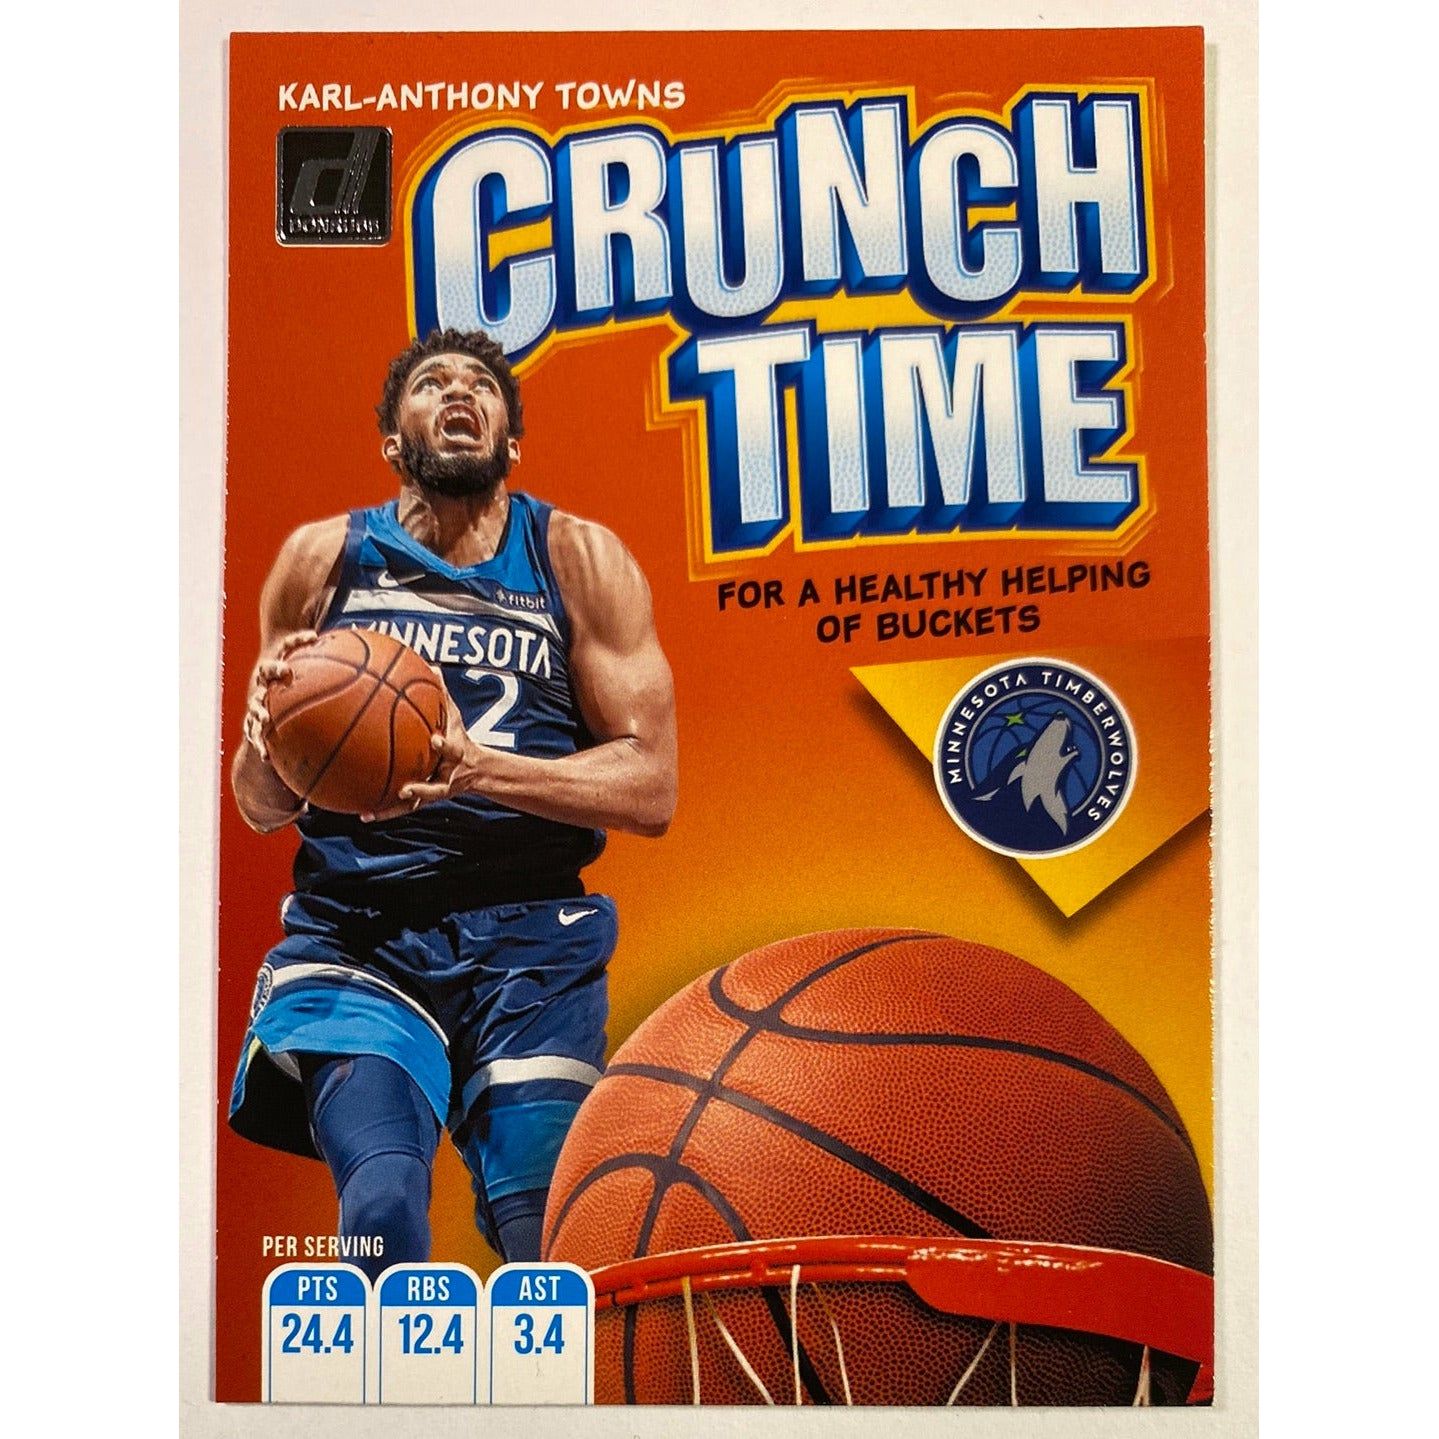  2019-20 Donruss Karl-Anthony Towns Crunch Time  Local Legends Cards & Collectibles